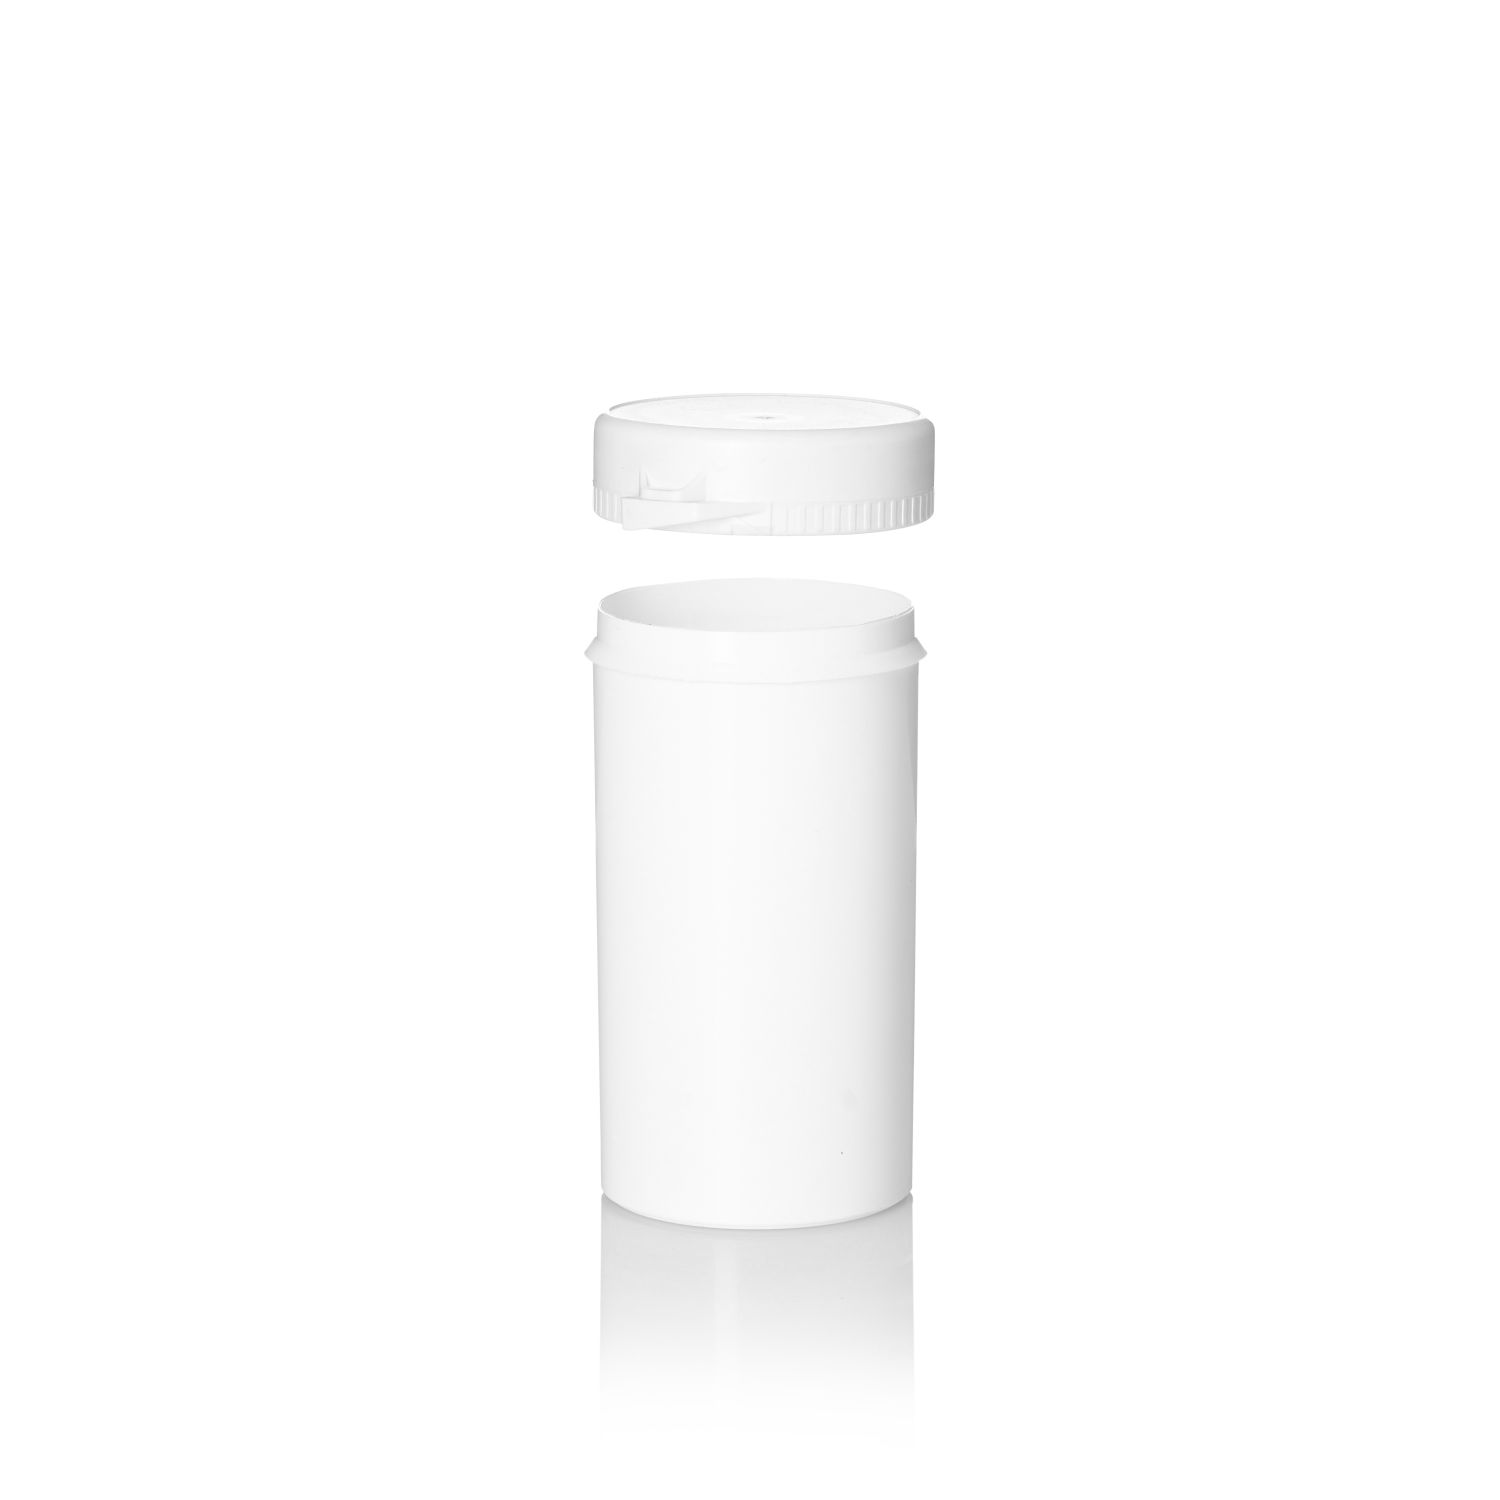 Stockists Of 160ml White PP Tamper Evident Snapsecure Jar